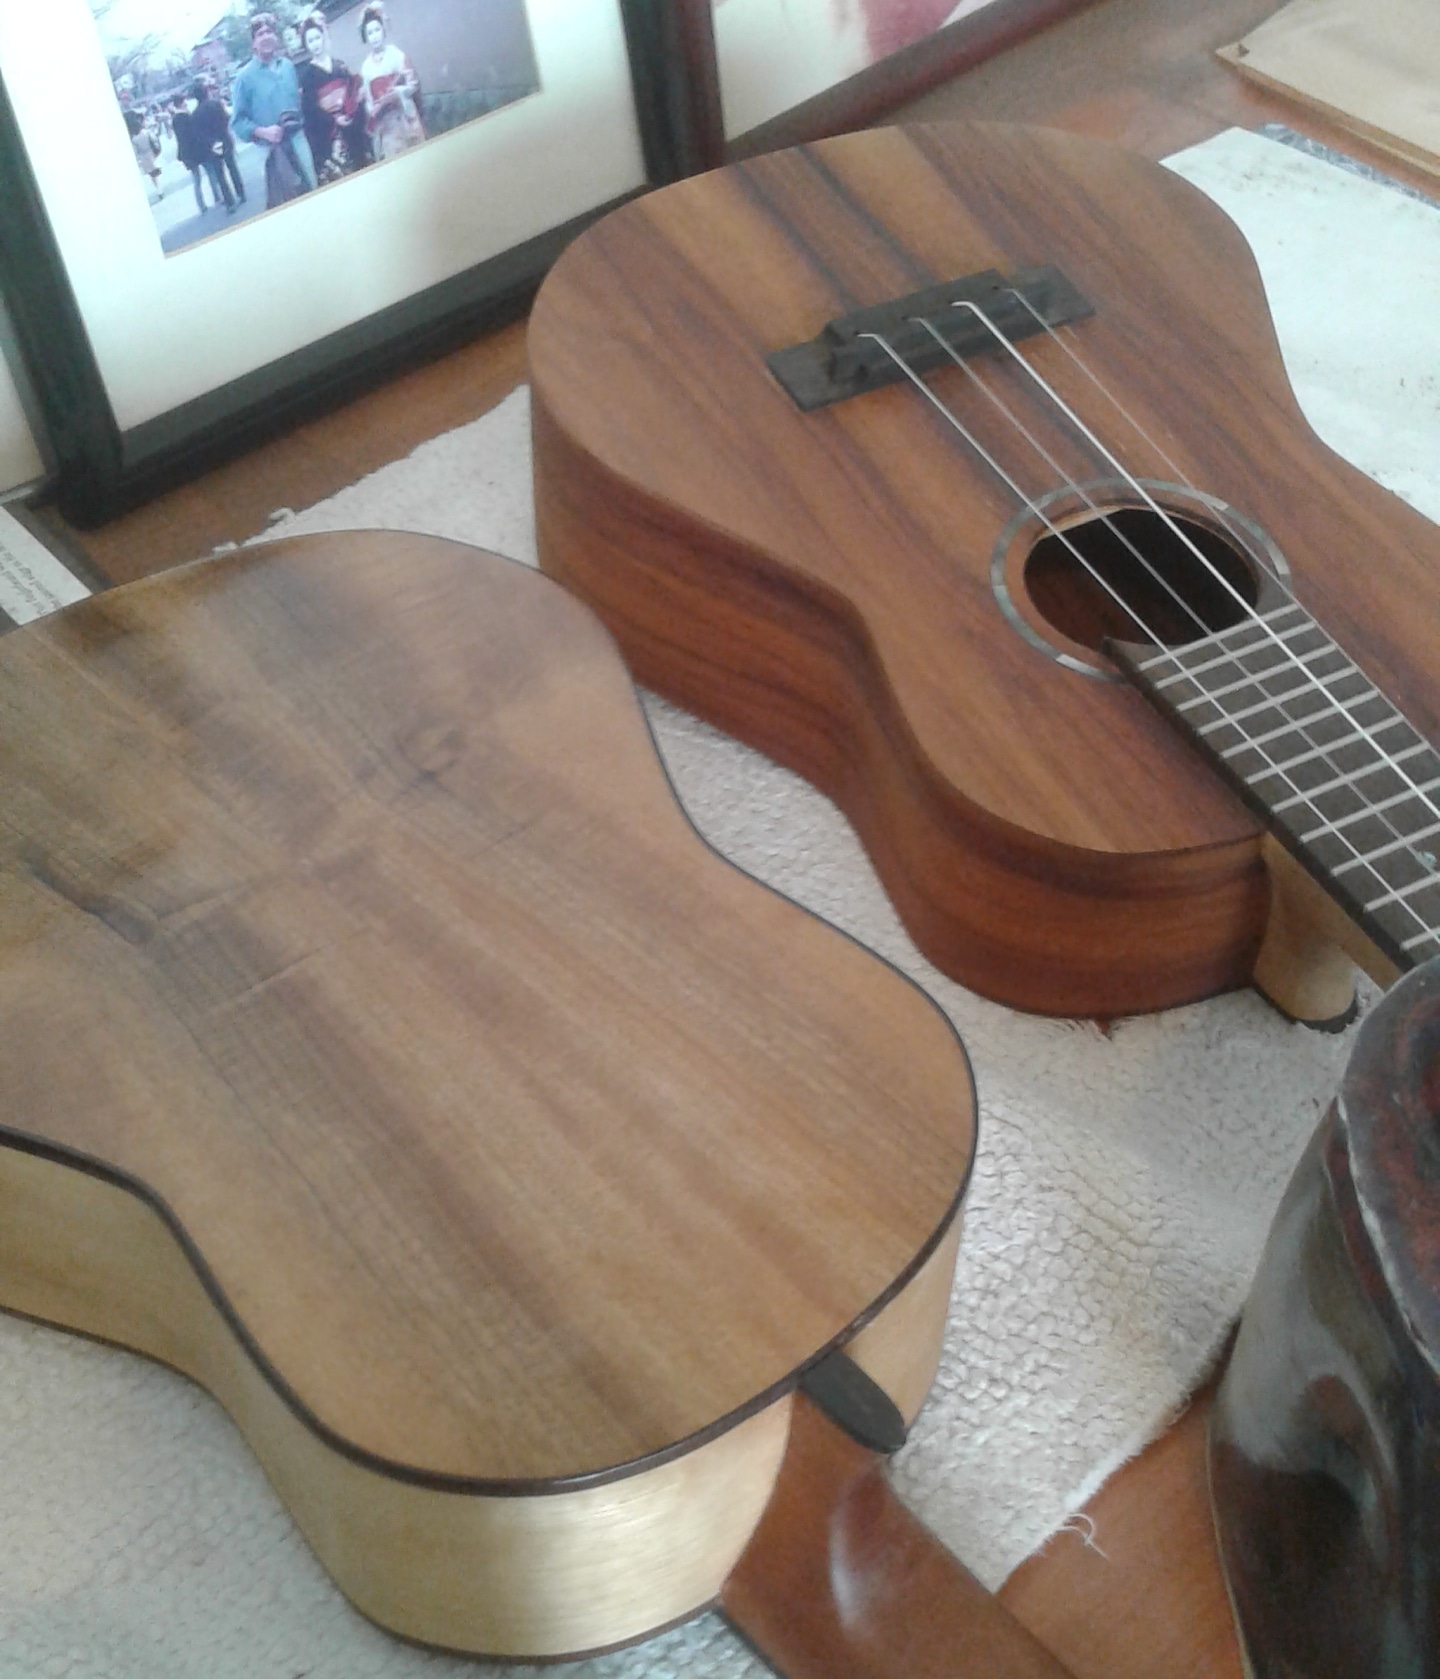 Nearly completed Koa ukulele on a glass table, with three holidays pies in the background